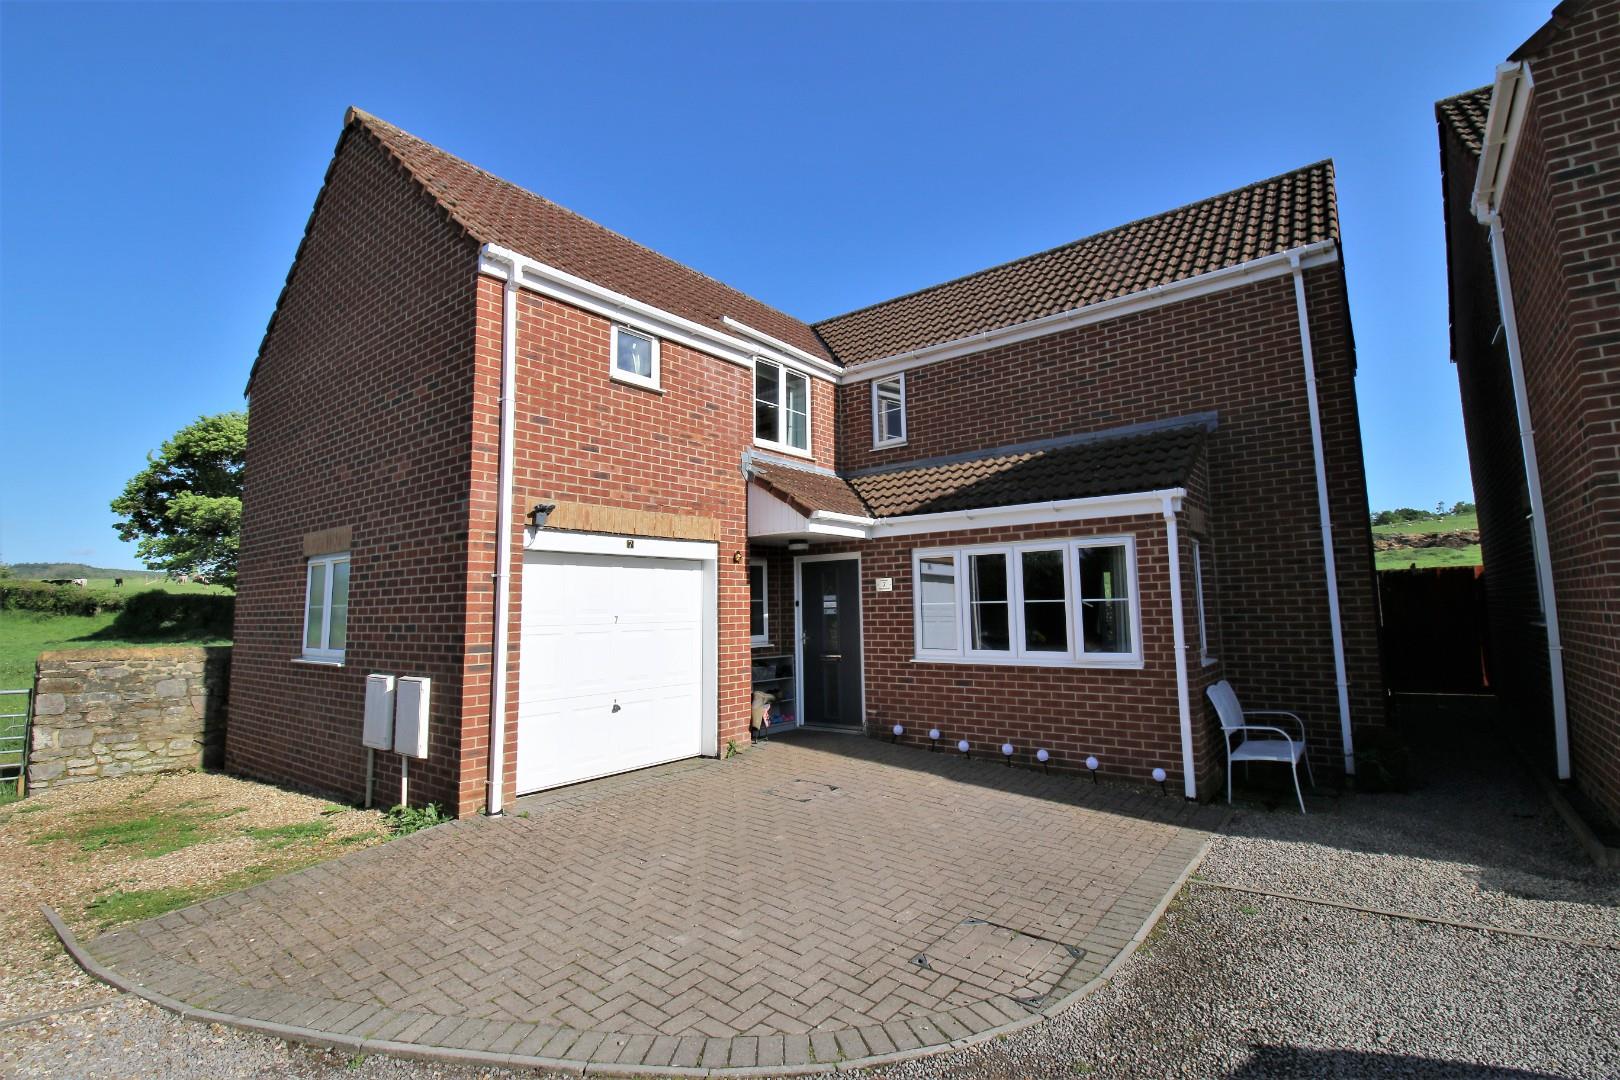 Family home backing onto farmland in the village of Claverham